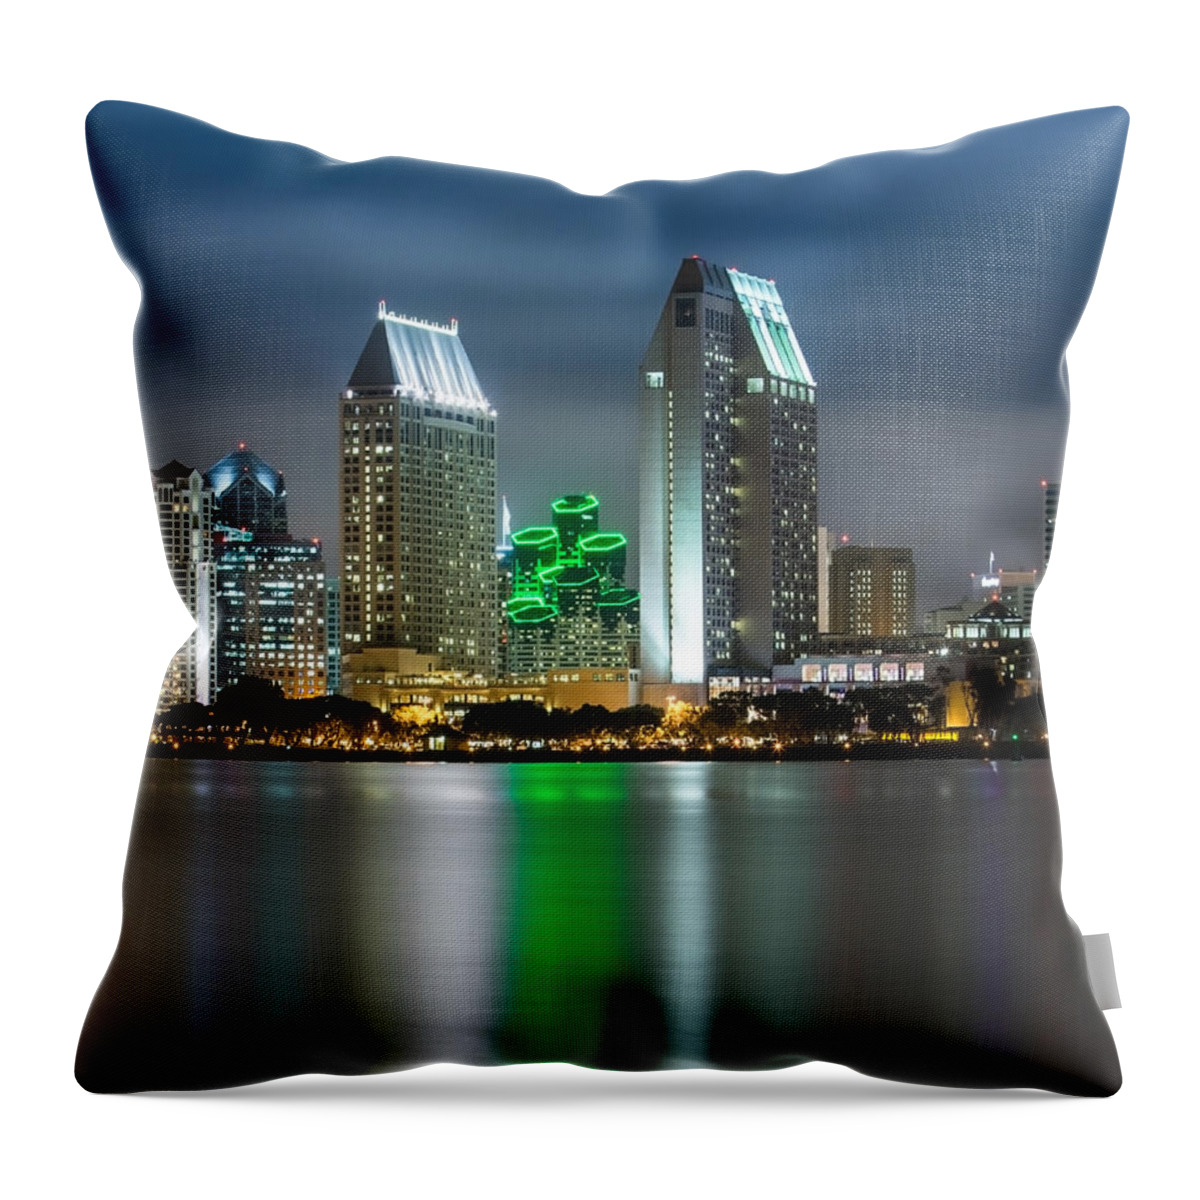 San Diego; Skyline; California; Sky Scraper; City Lights; Clouds; Reflection Throw Pillow featuring the photograph City of San Diego Skyline 1 by Larry Marshall